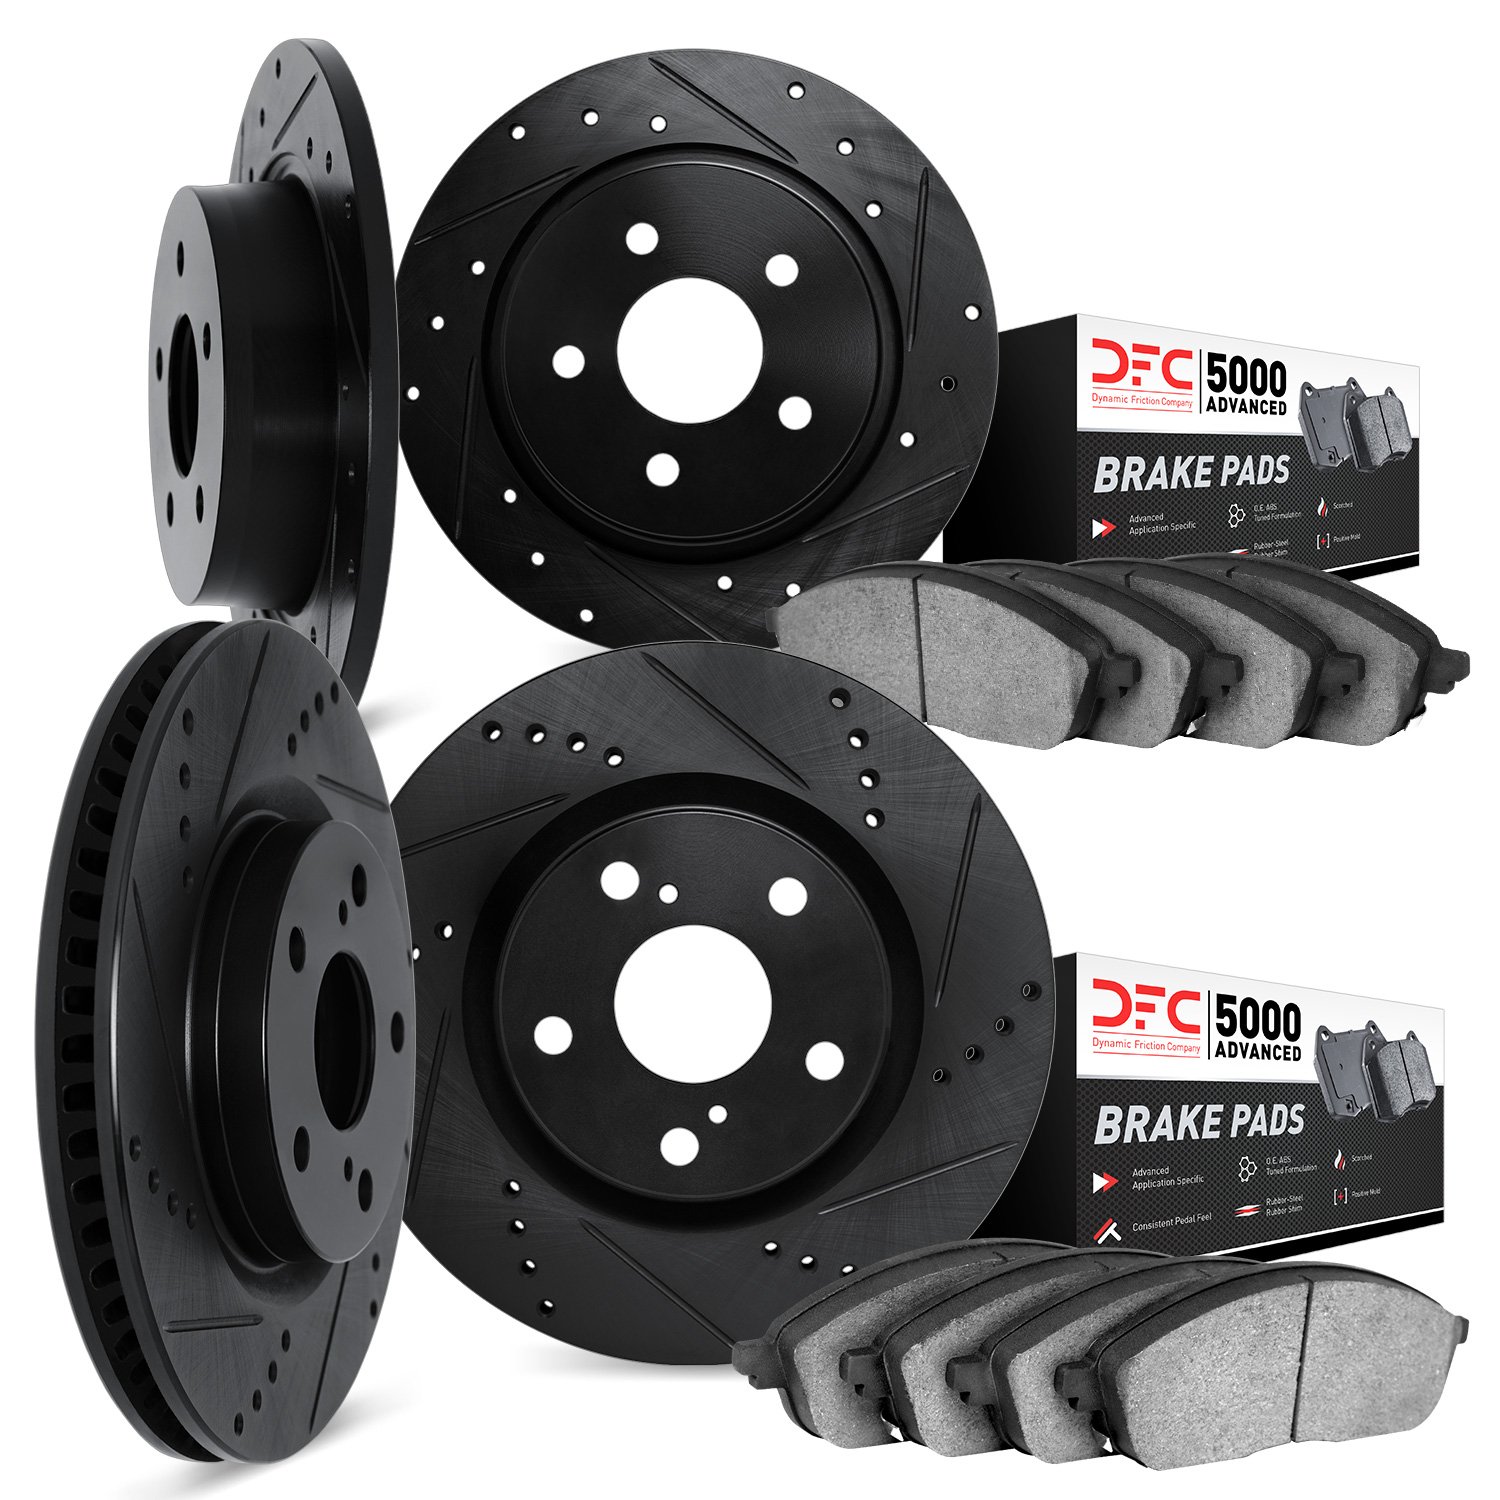 8504-76143 Drilled/Slotted Brake Rotors w/5000 Advanced Brake Pads Kit [Black], 2004-2007 Lexus/Toyota/Scion, Position: Front an